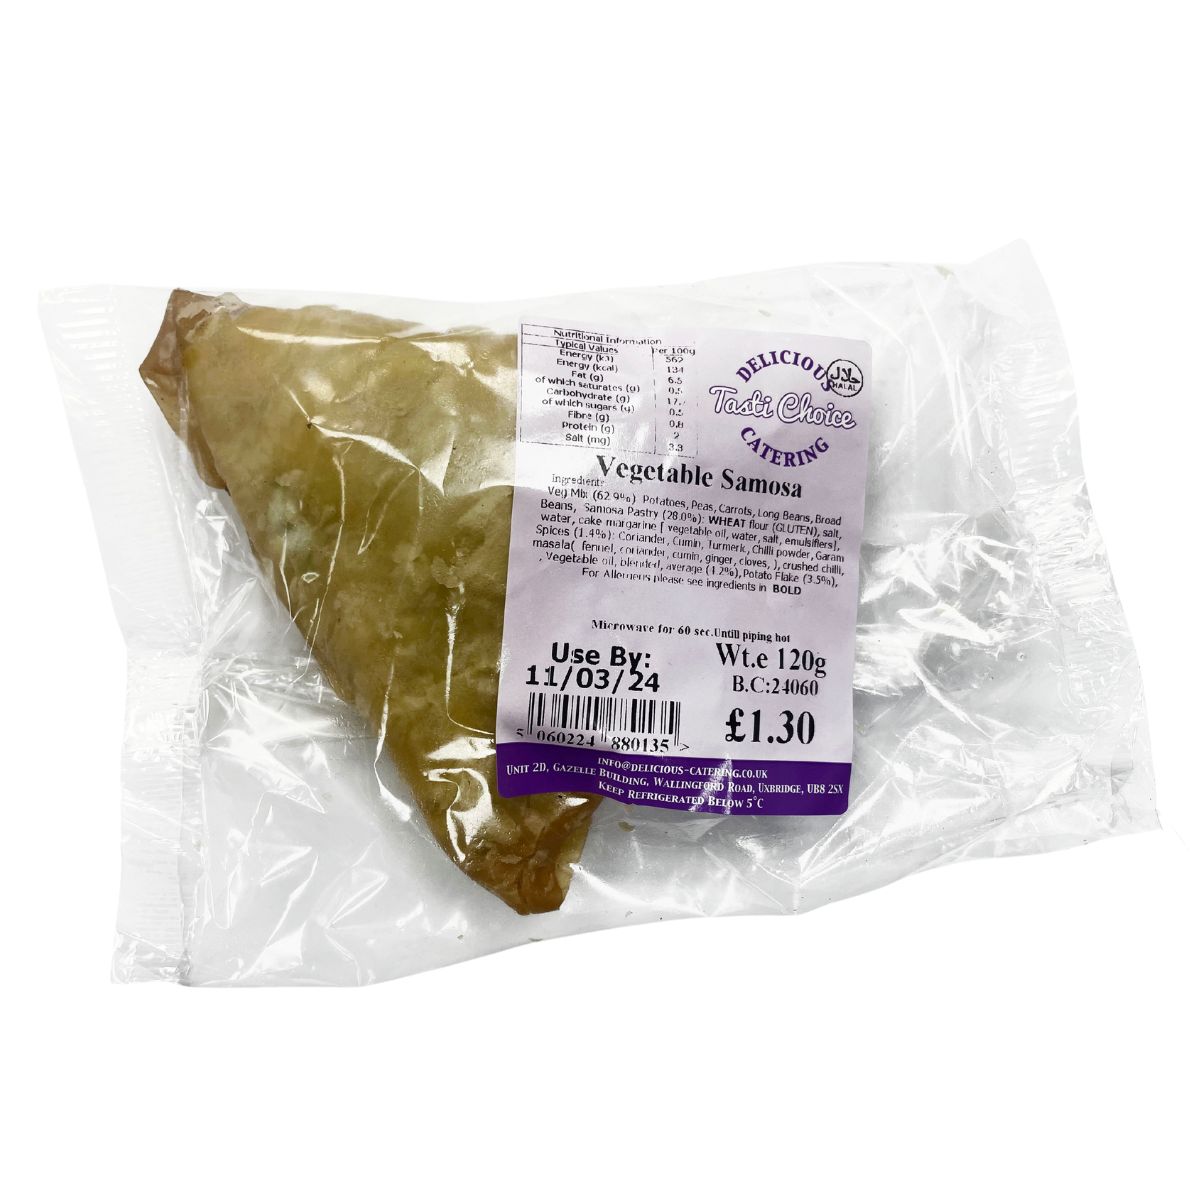 A delicious Catering - Tasti Choice Vegetable Samosa - 120g in a plastic bag on a white background.